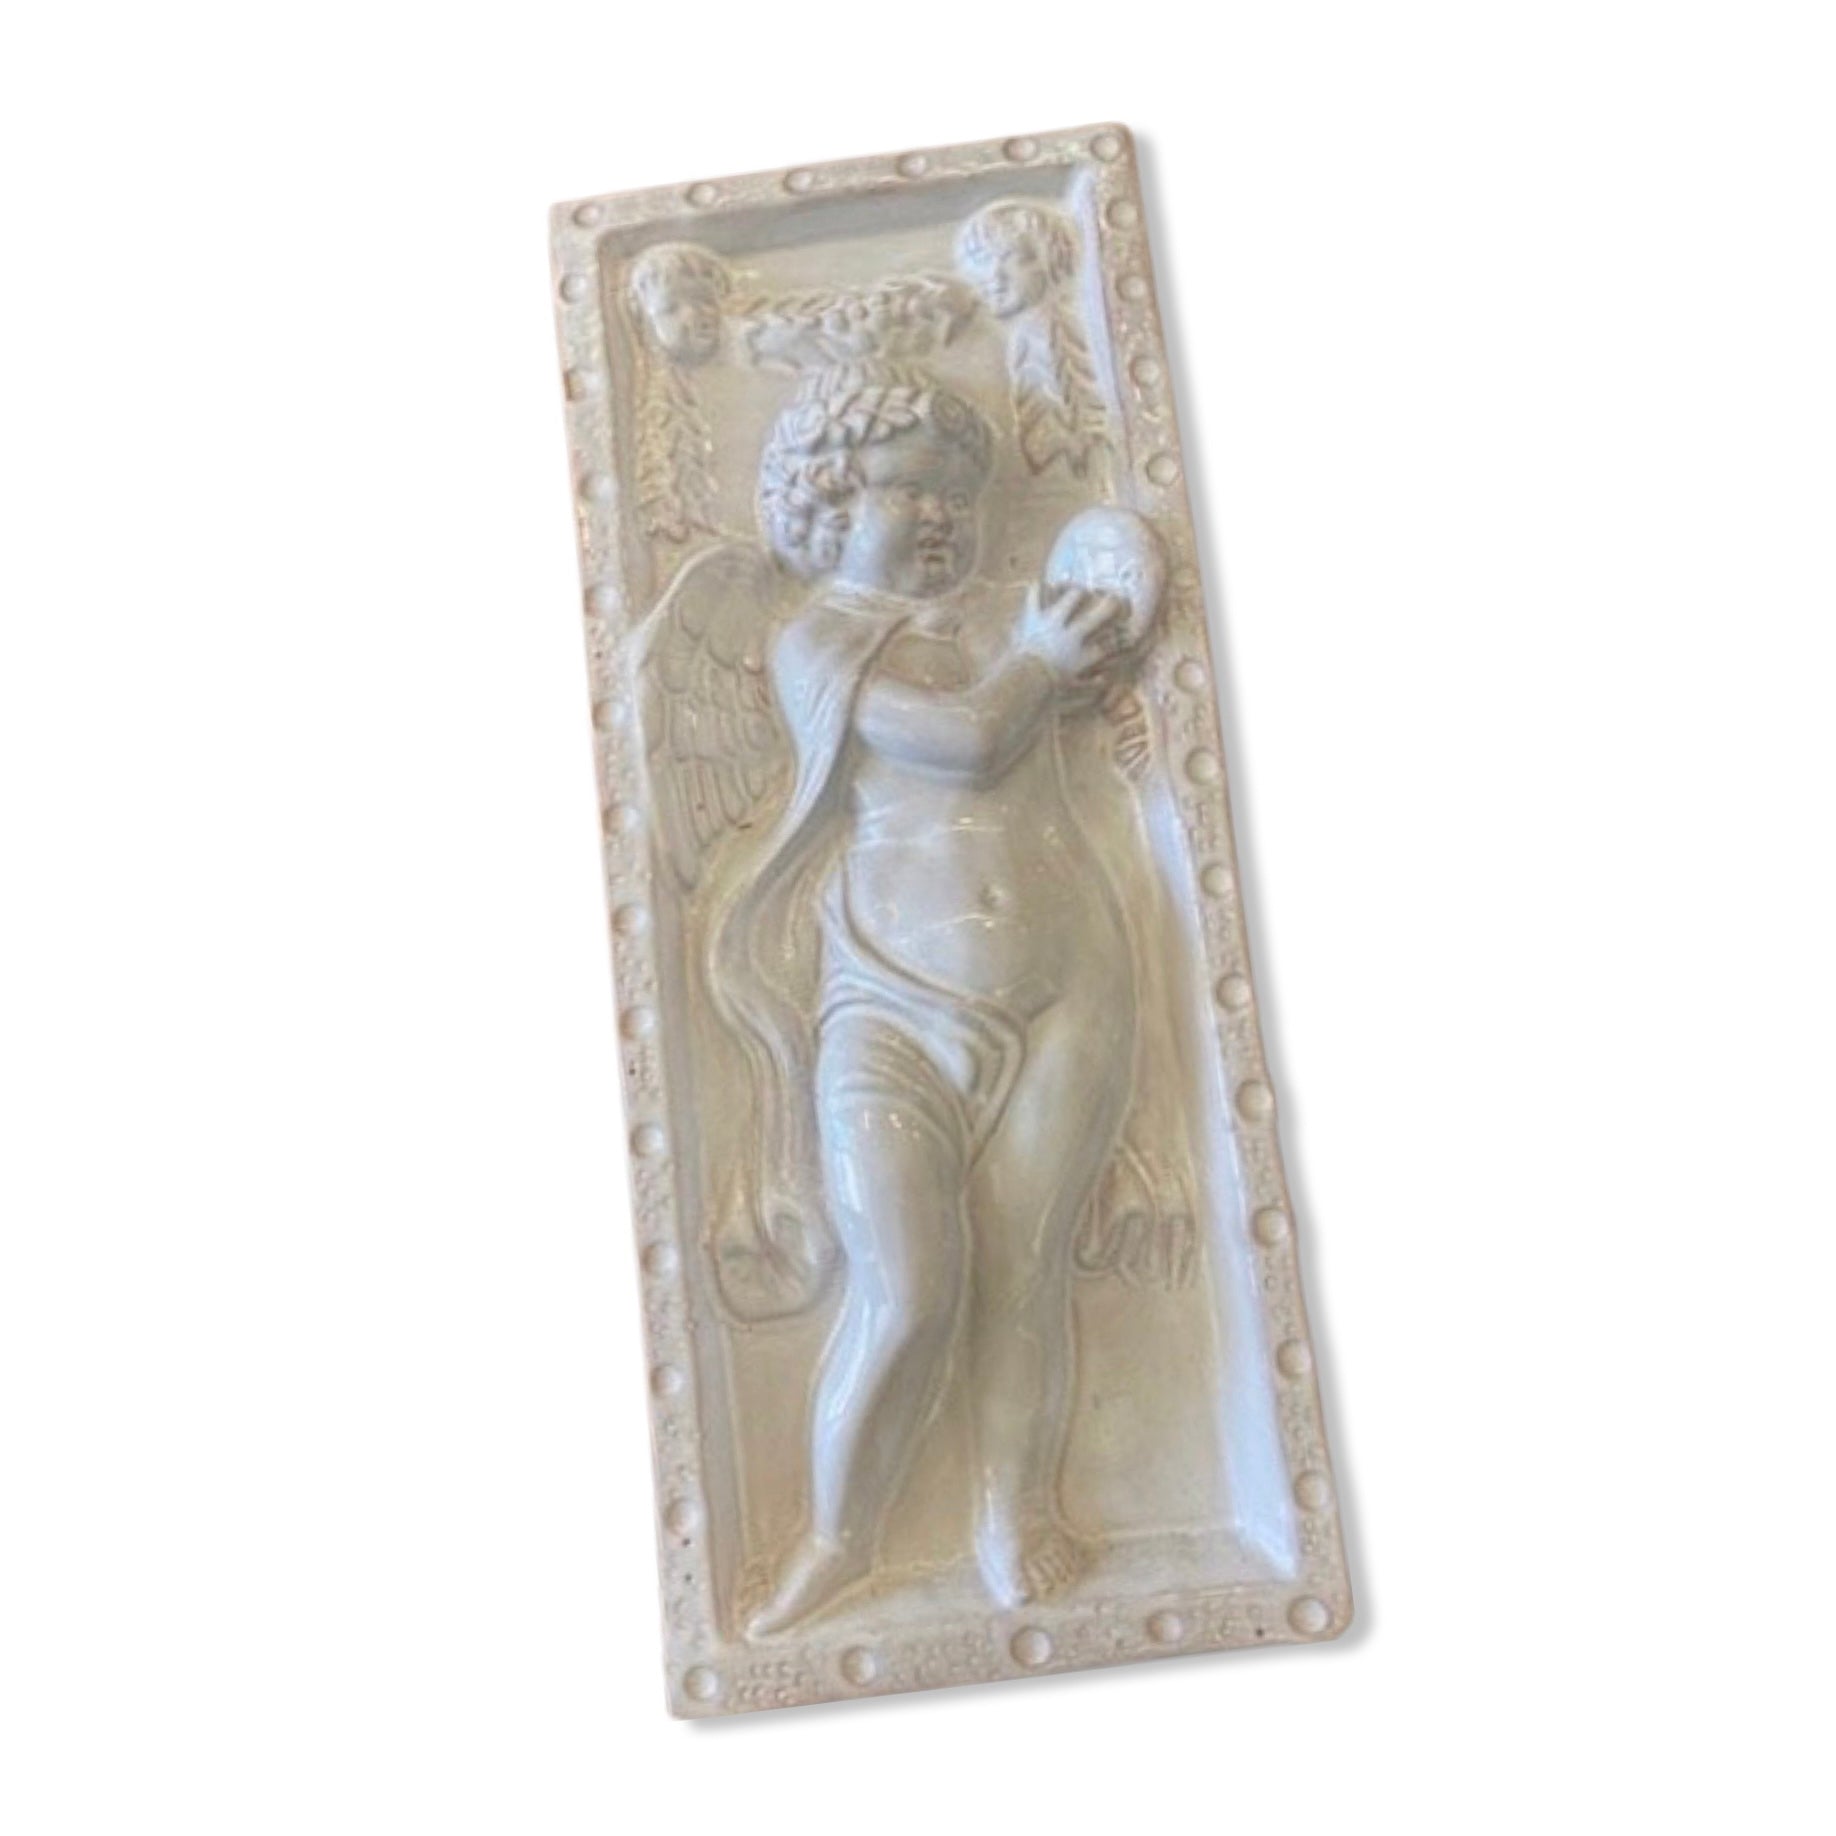 Musical Angel Drum Rectangular Plaque, ceramics, pottery, italian design, majolica, handmade, handcrafted, handpainted, home decor, kitchen art, home goods, deruta, majolica, Artisan, treasures, traditional art, modern art, gift ideas, style, SF, shop small business, artists, shop online, landmark store, legacy, one of a kind, limited edition, gift guide, gift shop, retail shop, decorations, shopping, italy, home staging, home decorating, home interiors